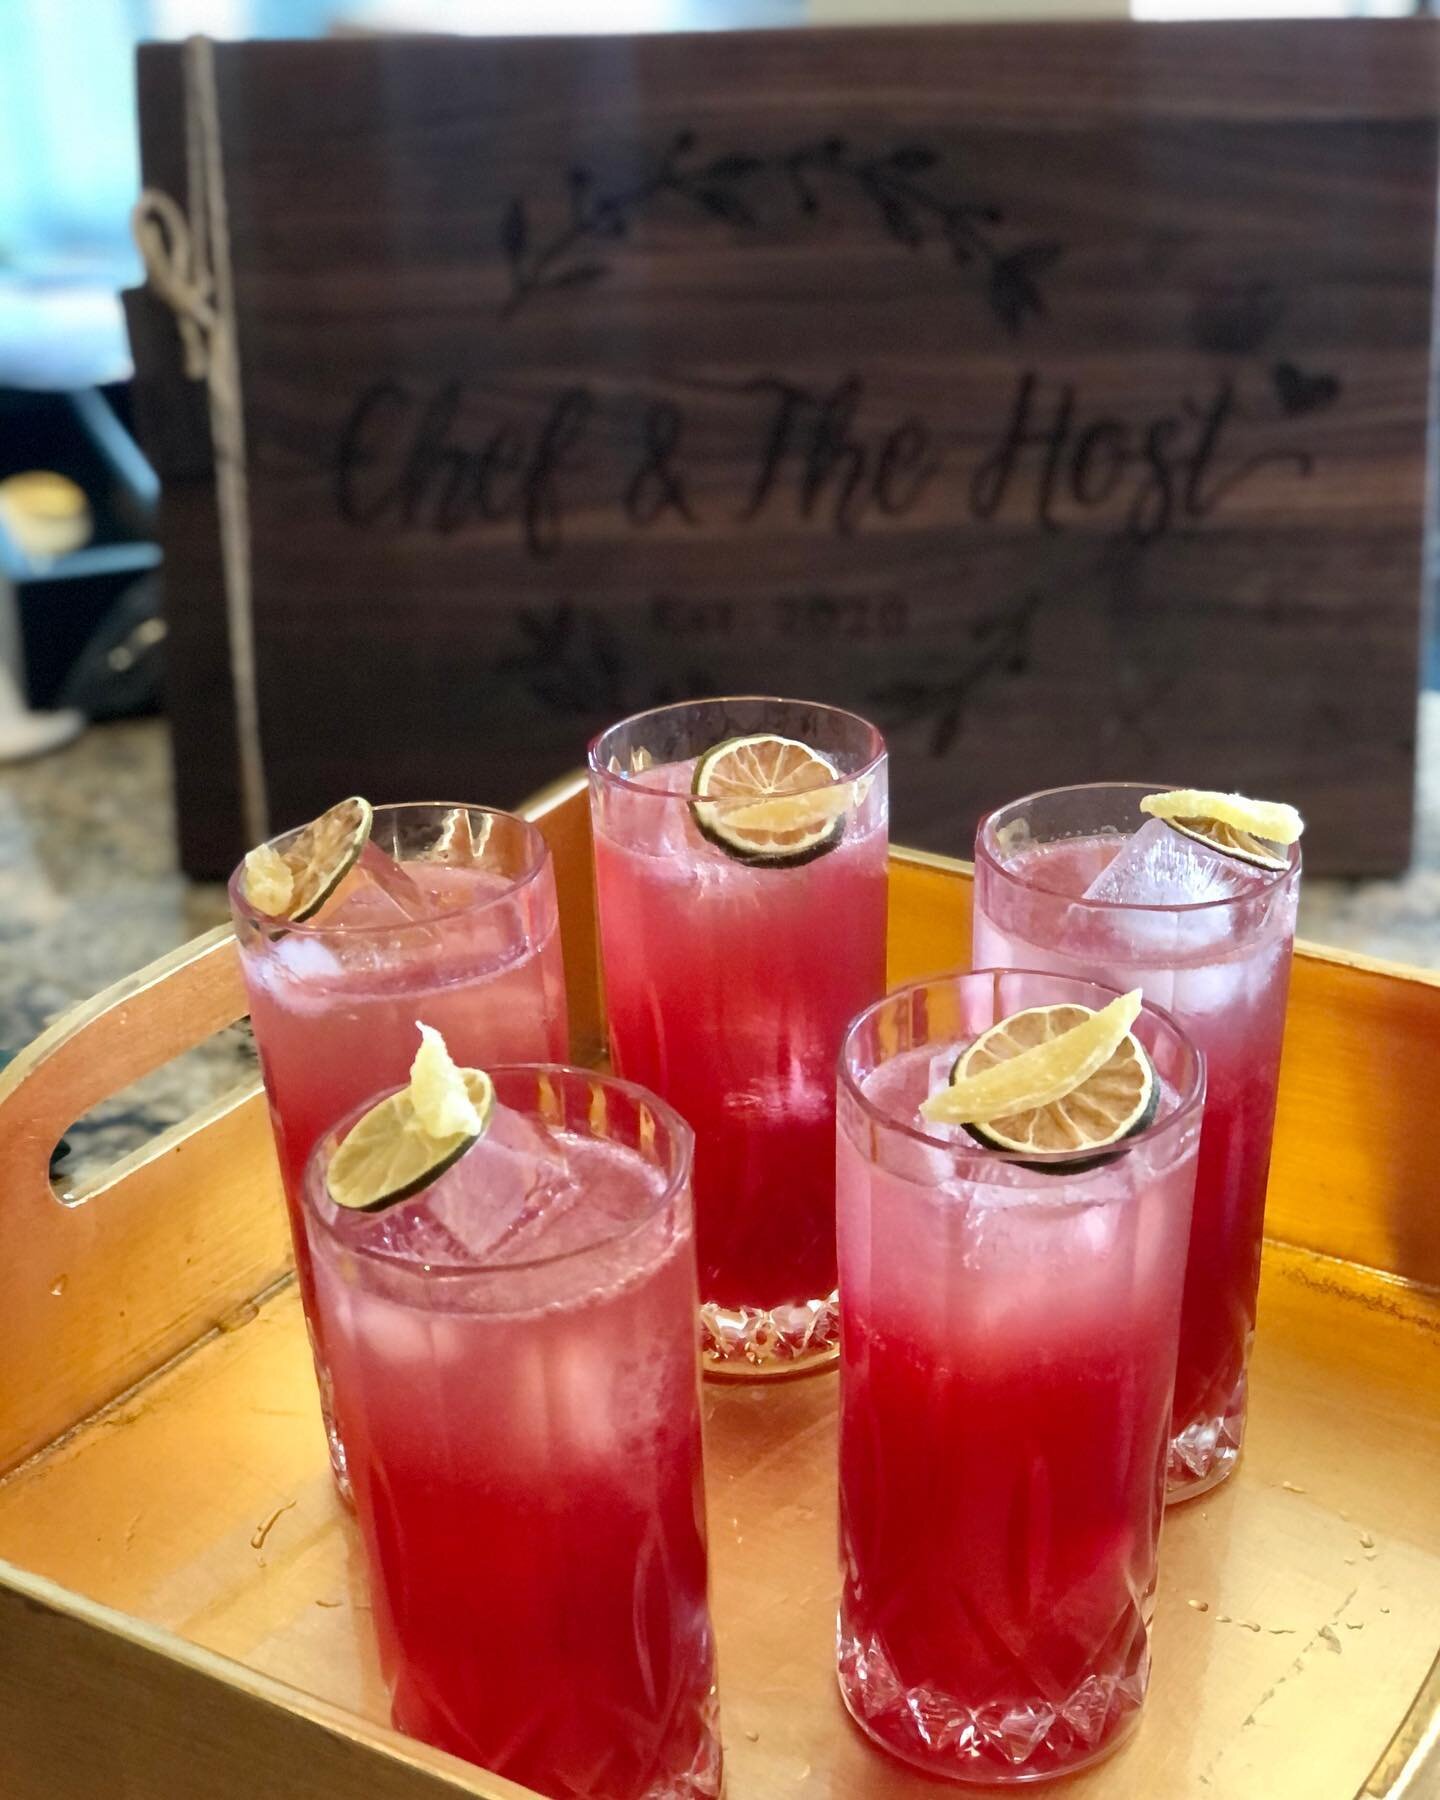 ✨CHEERS TO THE WEEKEND✨

Hibiscus Ginger Palomas make the world a happier place 
.
.
.
.
.
#chefandthehost  #privatechef #supportlocal #letseat #privateparty #tastingmenu #events #forthesoul #sandiego #hospitality #withlove #bestingredients #dinner #